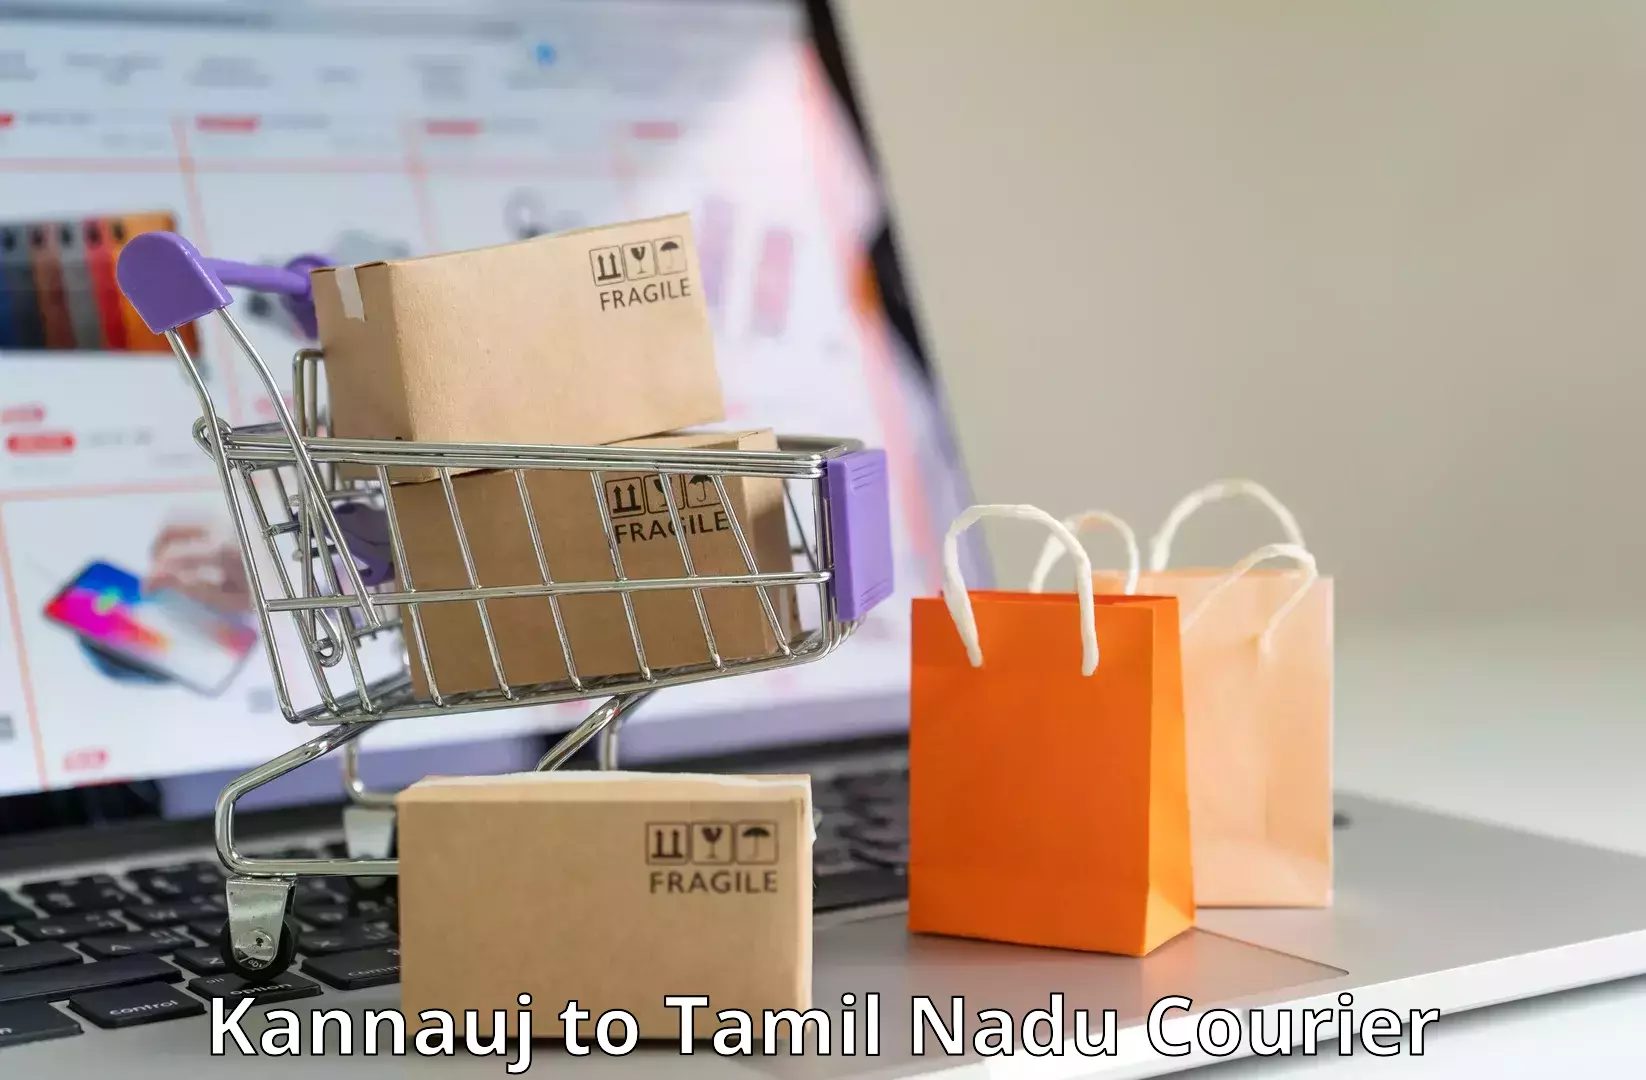 Postal and courier services Kannauj to Ooty